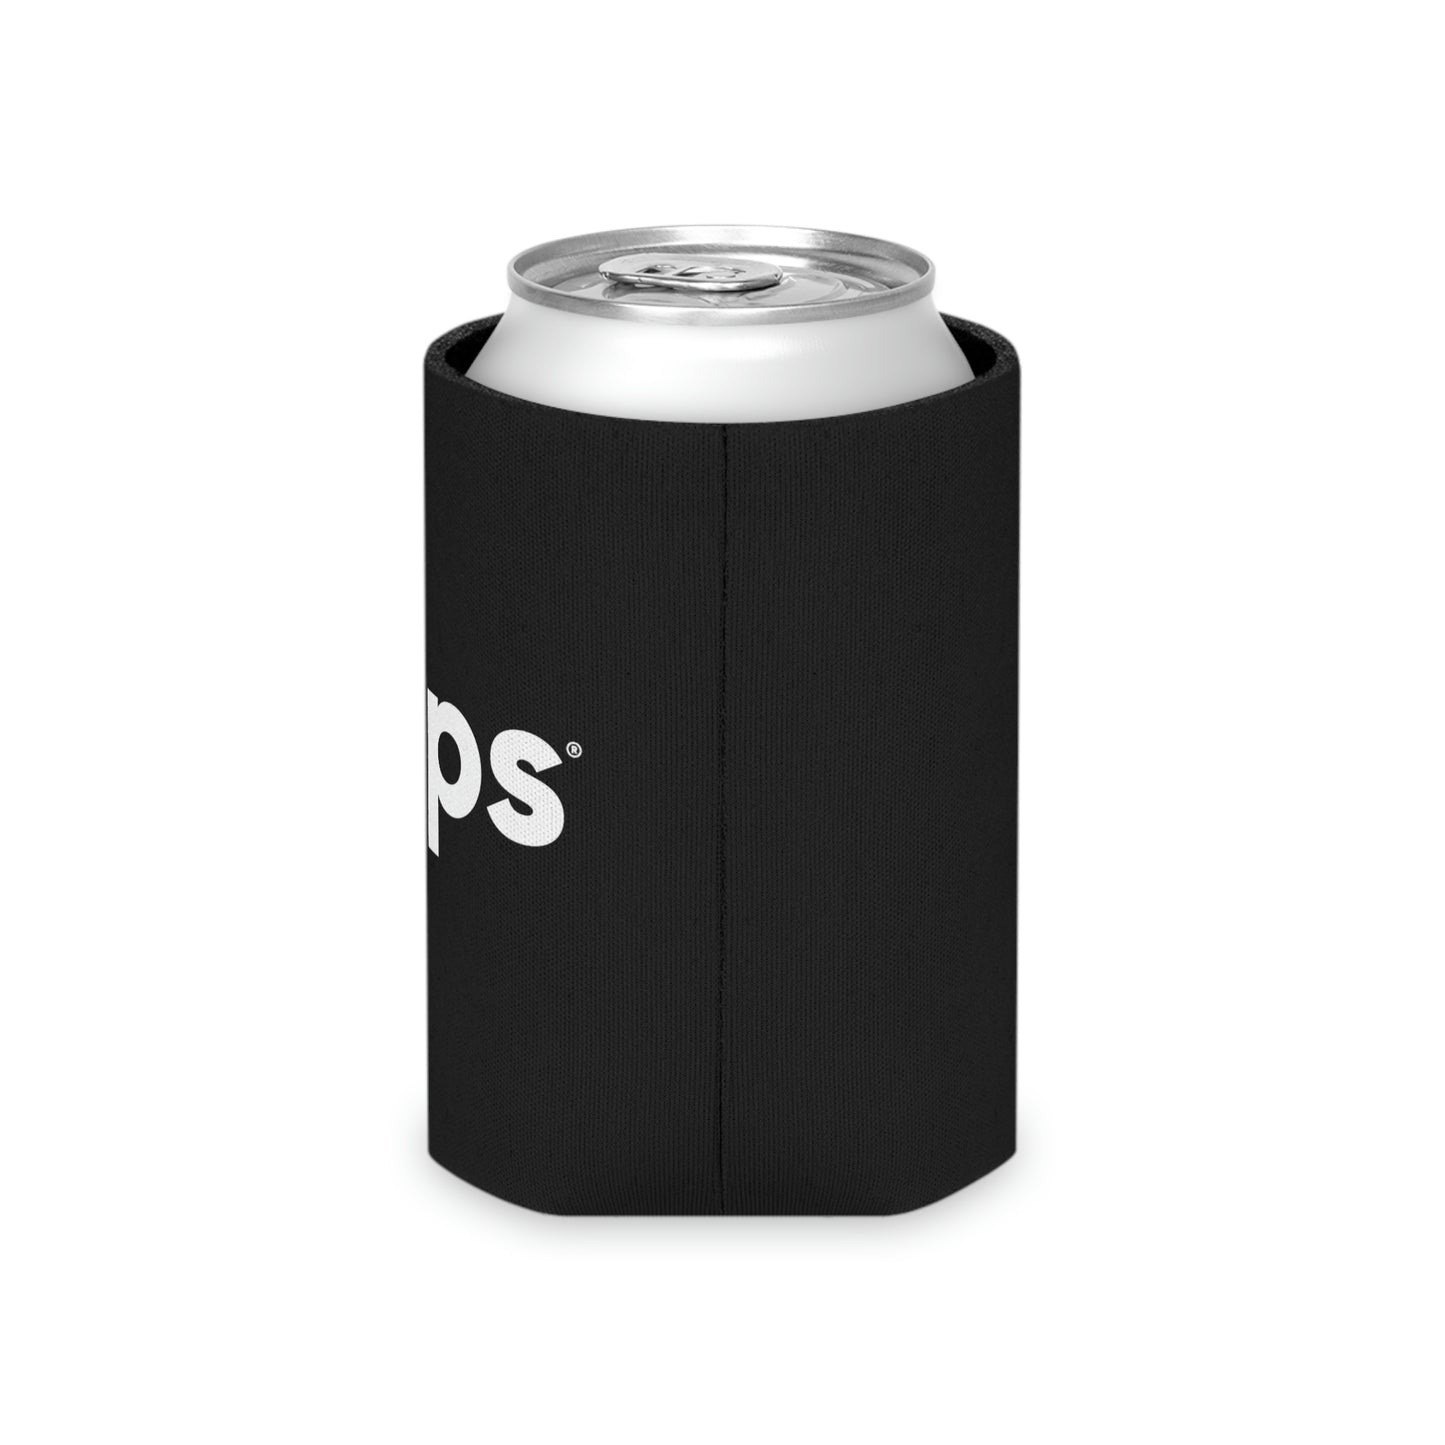 SMPS Koozie Can Sleeve